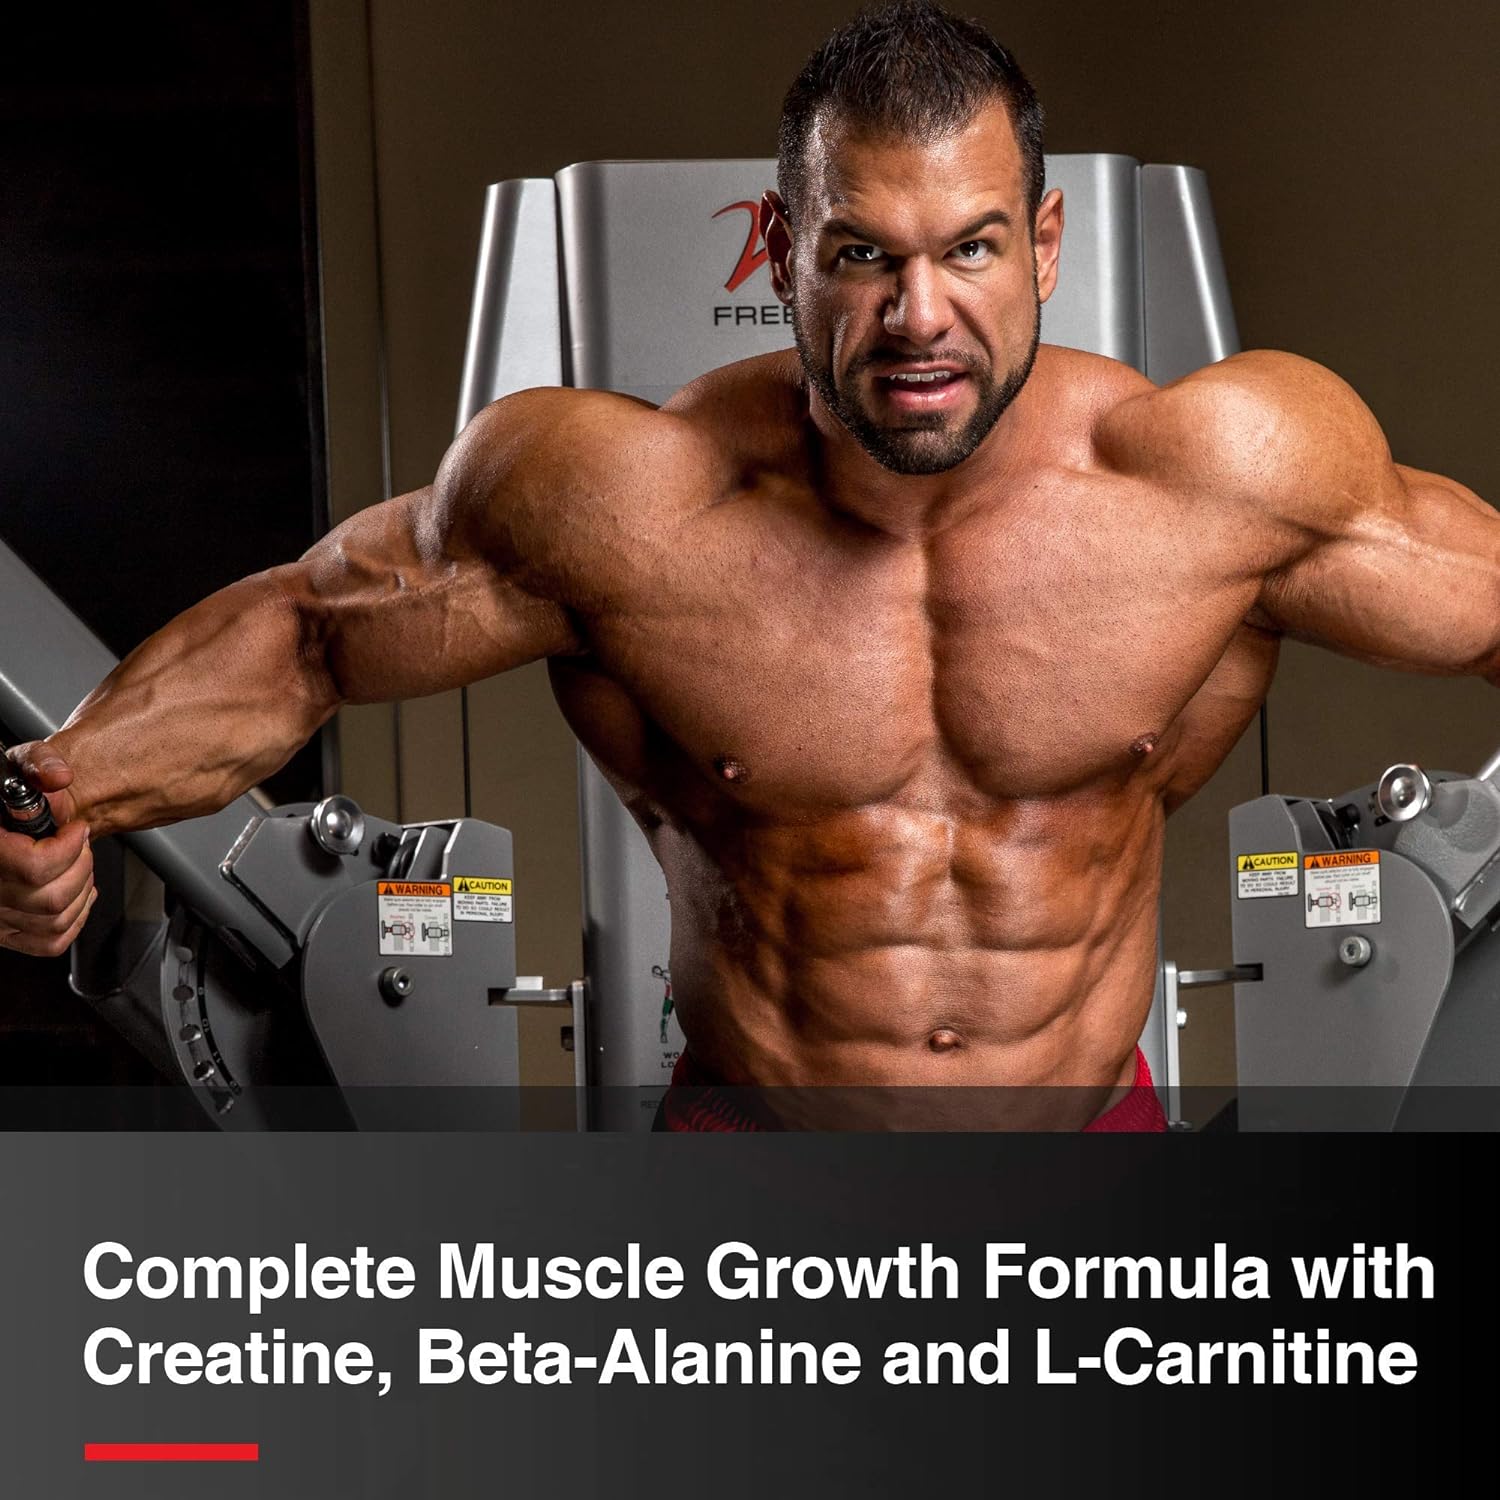 Complete muscle growth formula!